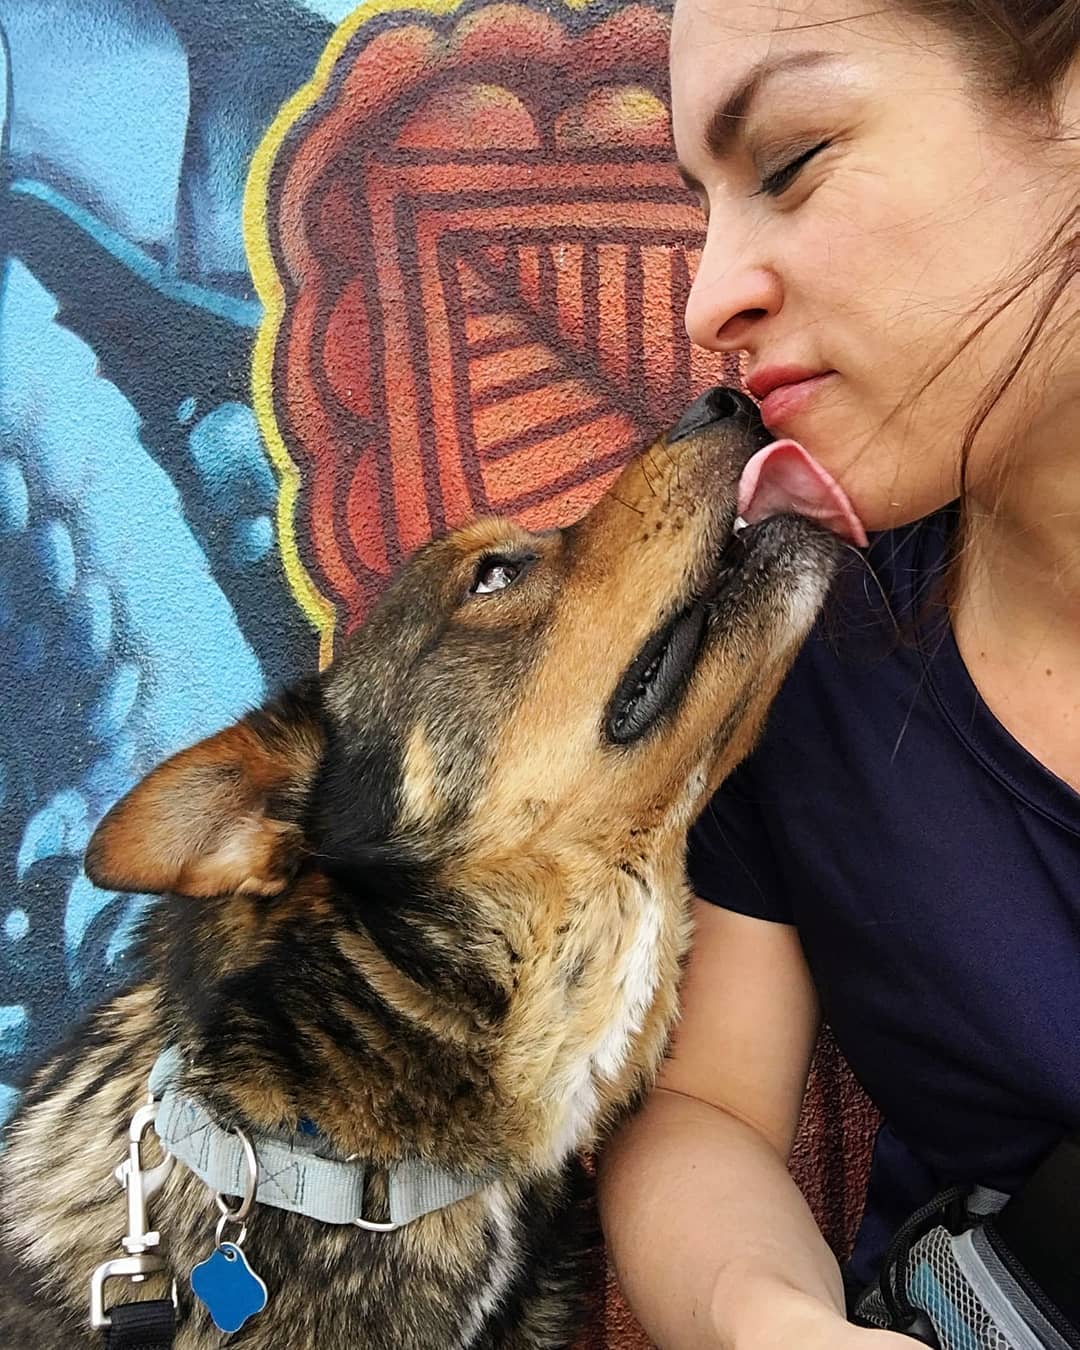 Dog licking woman's face. Photo by Instagram user @venuskelly